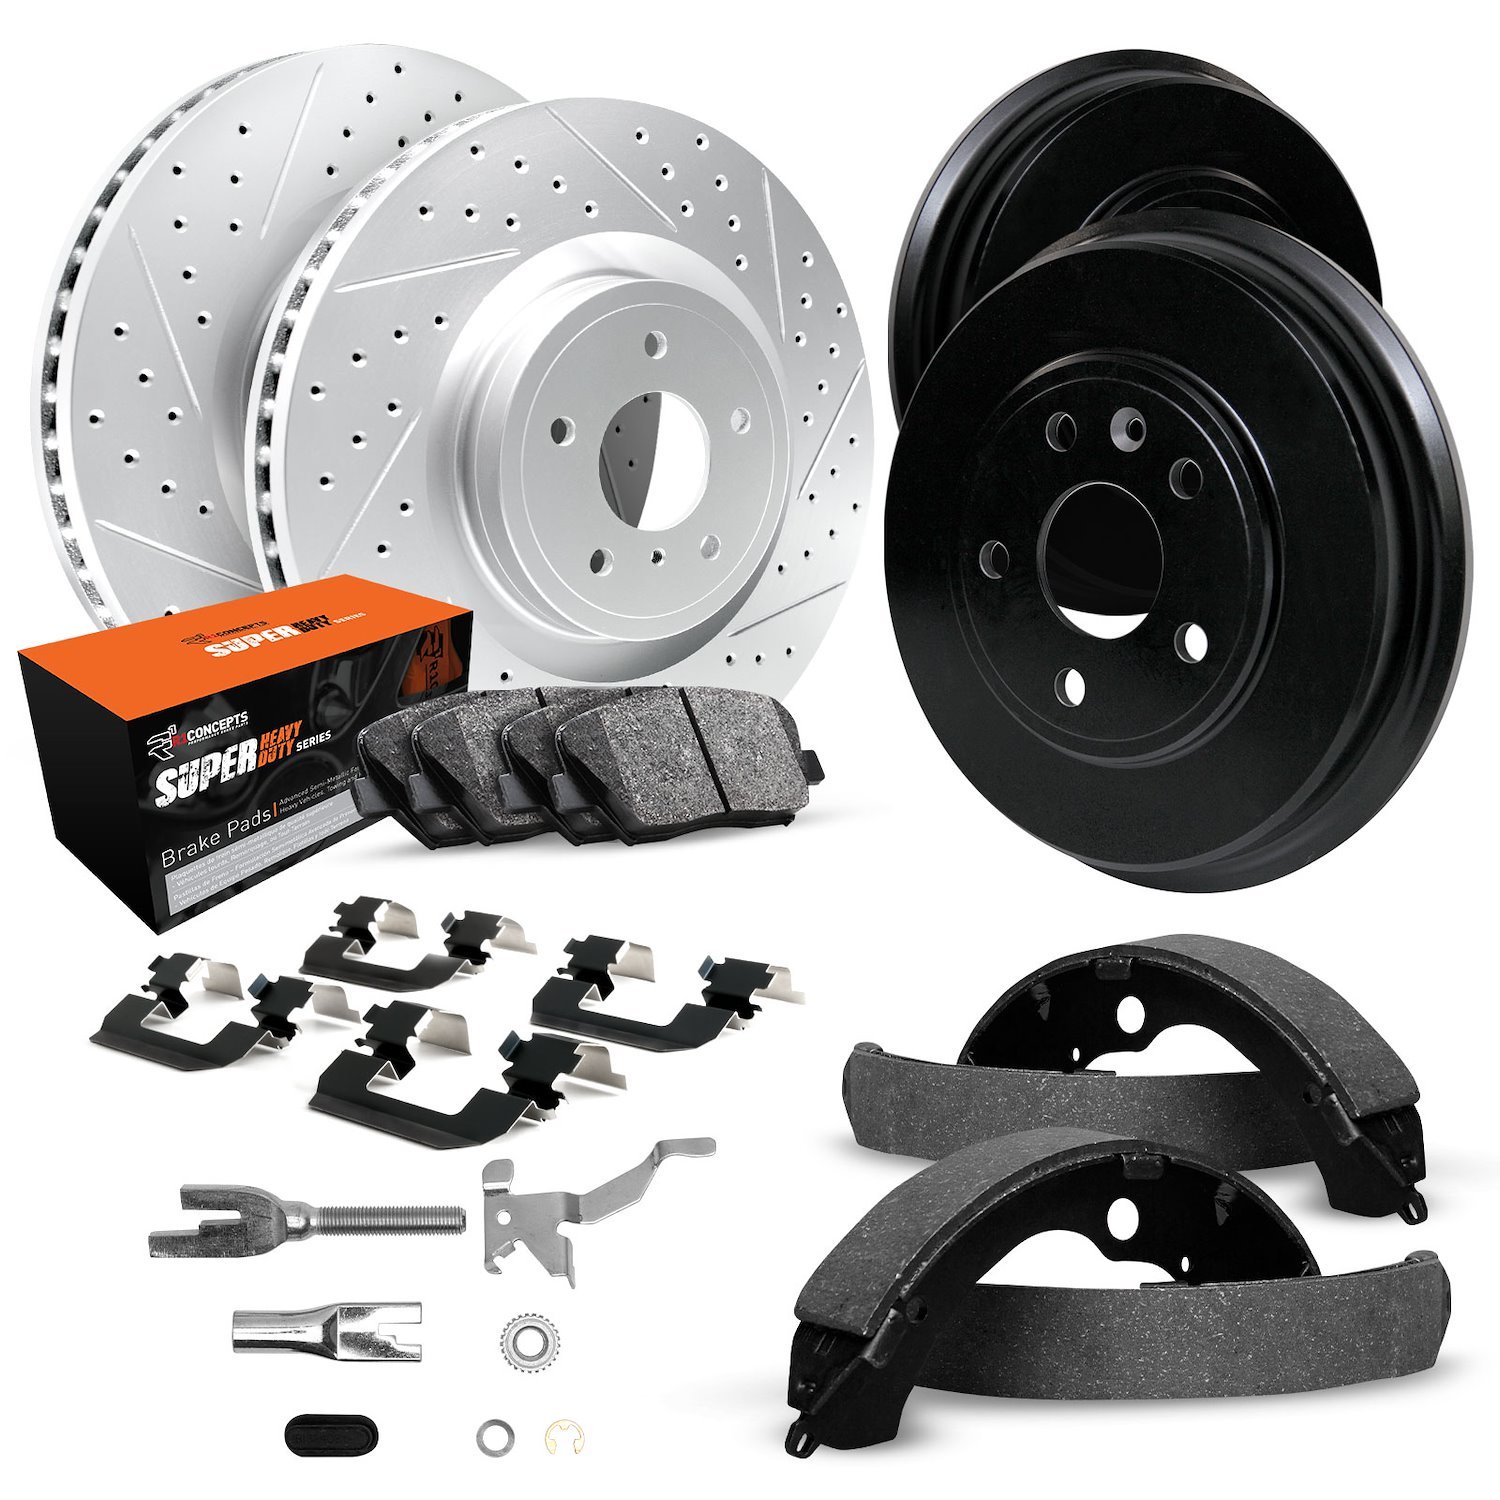 GEO-Carbon Drilled/Slotted Rotors/Drums w/Super-Duty Pads/Shoes/Hardware/Adjusters, 1971-1976 GM, Position: Front/Rear